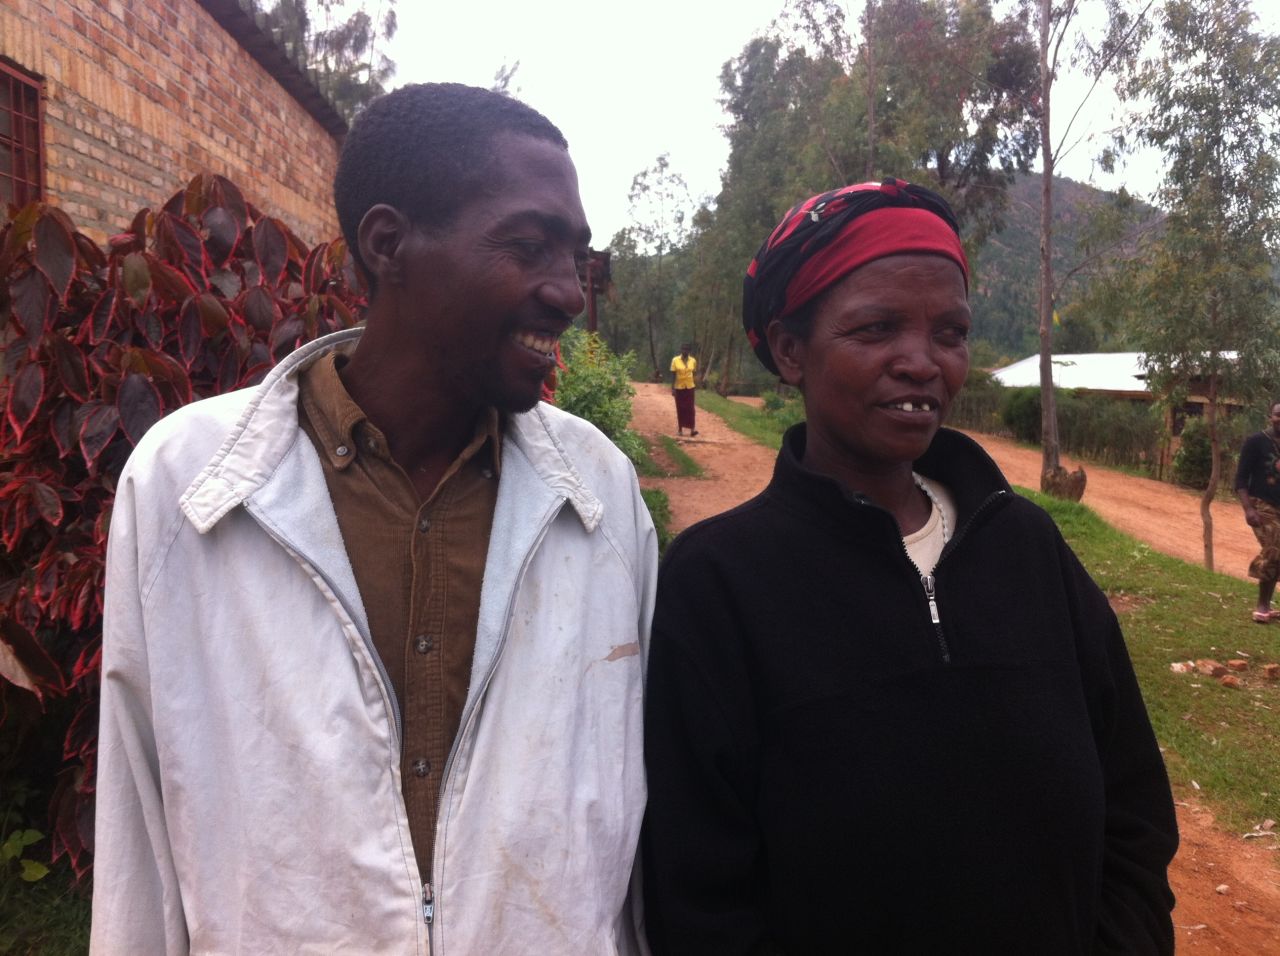 During the Rwanda genocide in 1994, Fidele Mparikubwimana killed 10 members of Esperance Mugemana's family. He later spent 10 years in prison. After Mparikubwimana asked her forgiveness and the pair participated in a reconciliation program, Mugemana found it within herself to <a href="http://ireport.cnn.com/docs/DOC-1116373">forgive him</a>. They now live as neighbors.